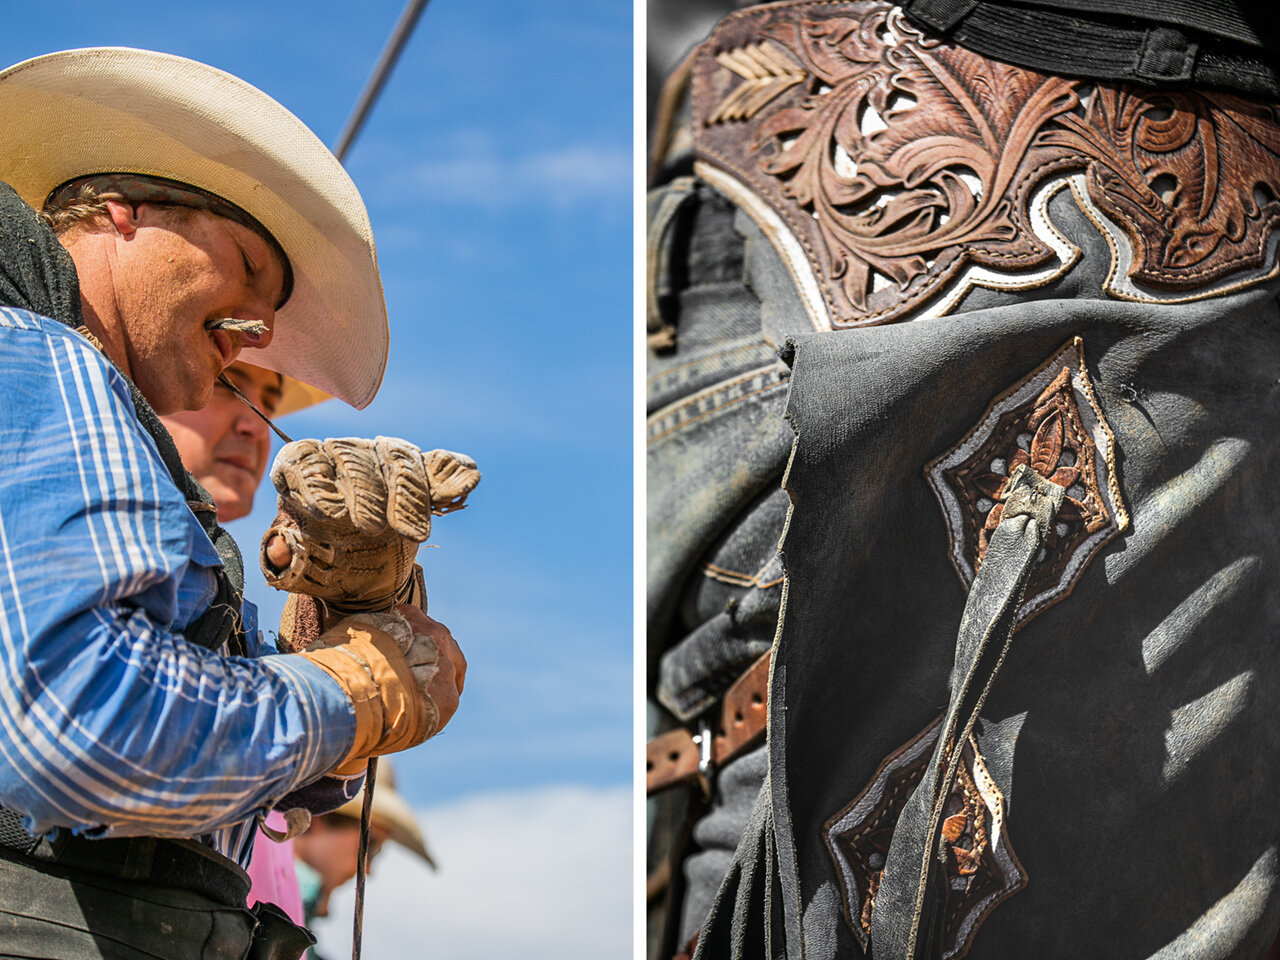 Cowboy details - final preparations before the bucking bronco